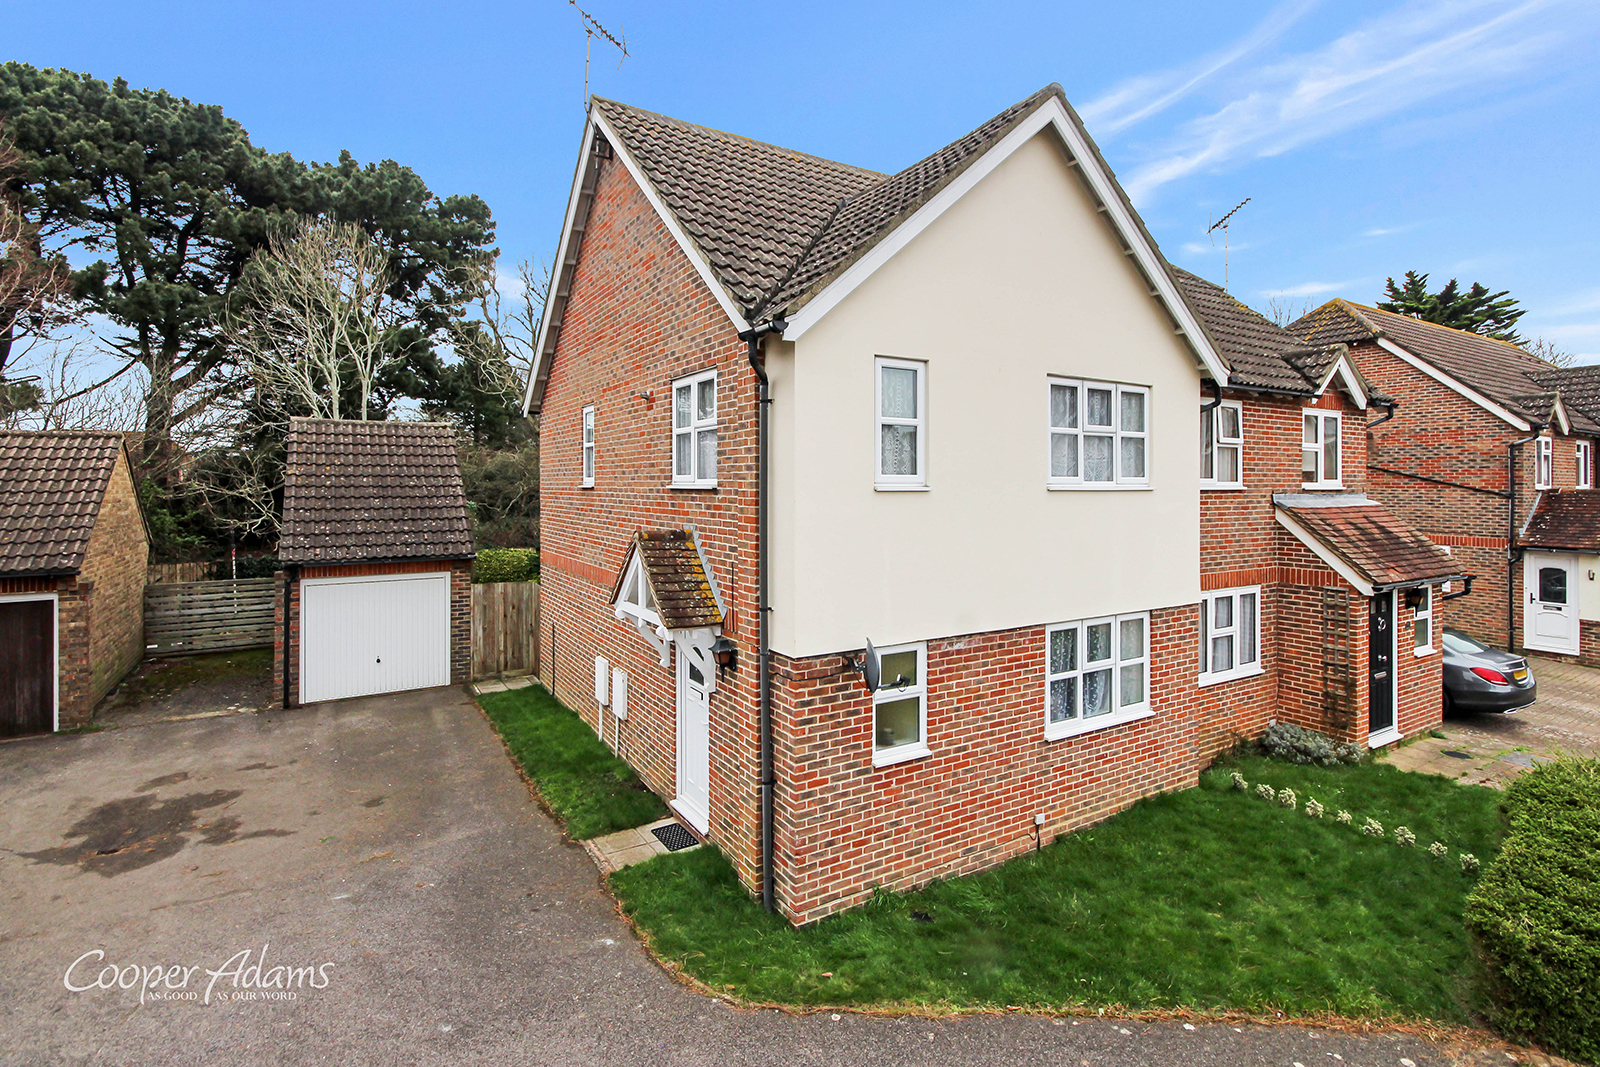 3 bed house for sale in Pebble Walk, Littlehampton  - Property Image 1